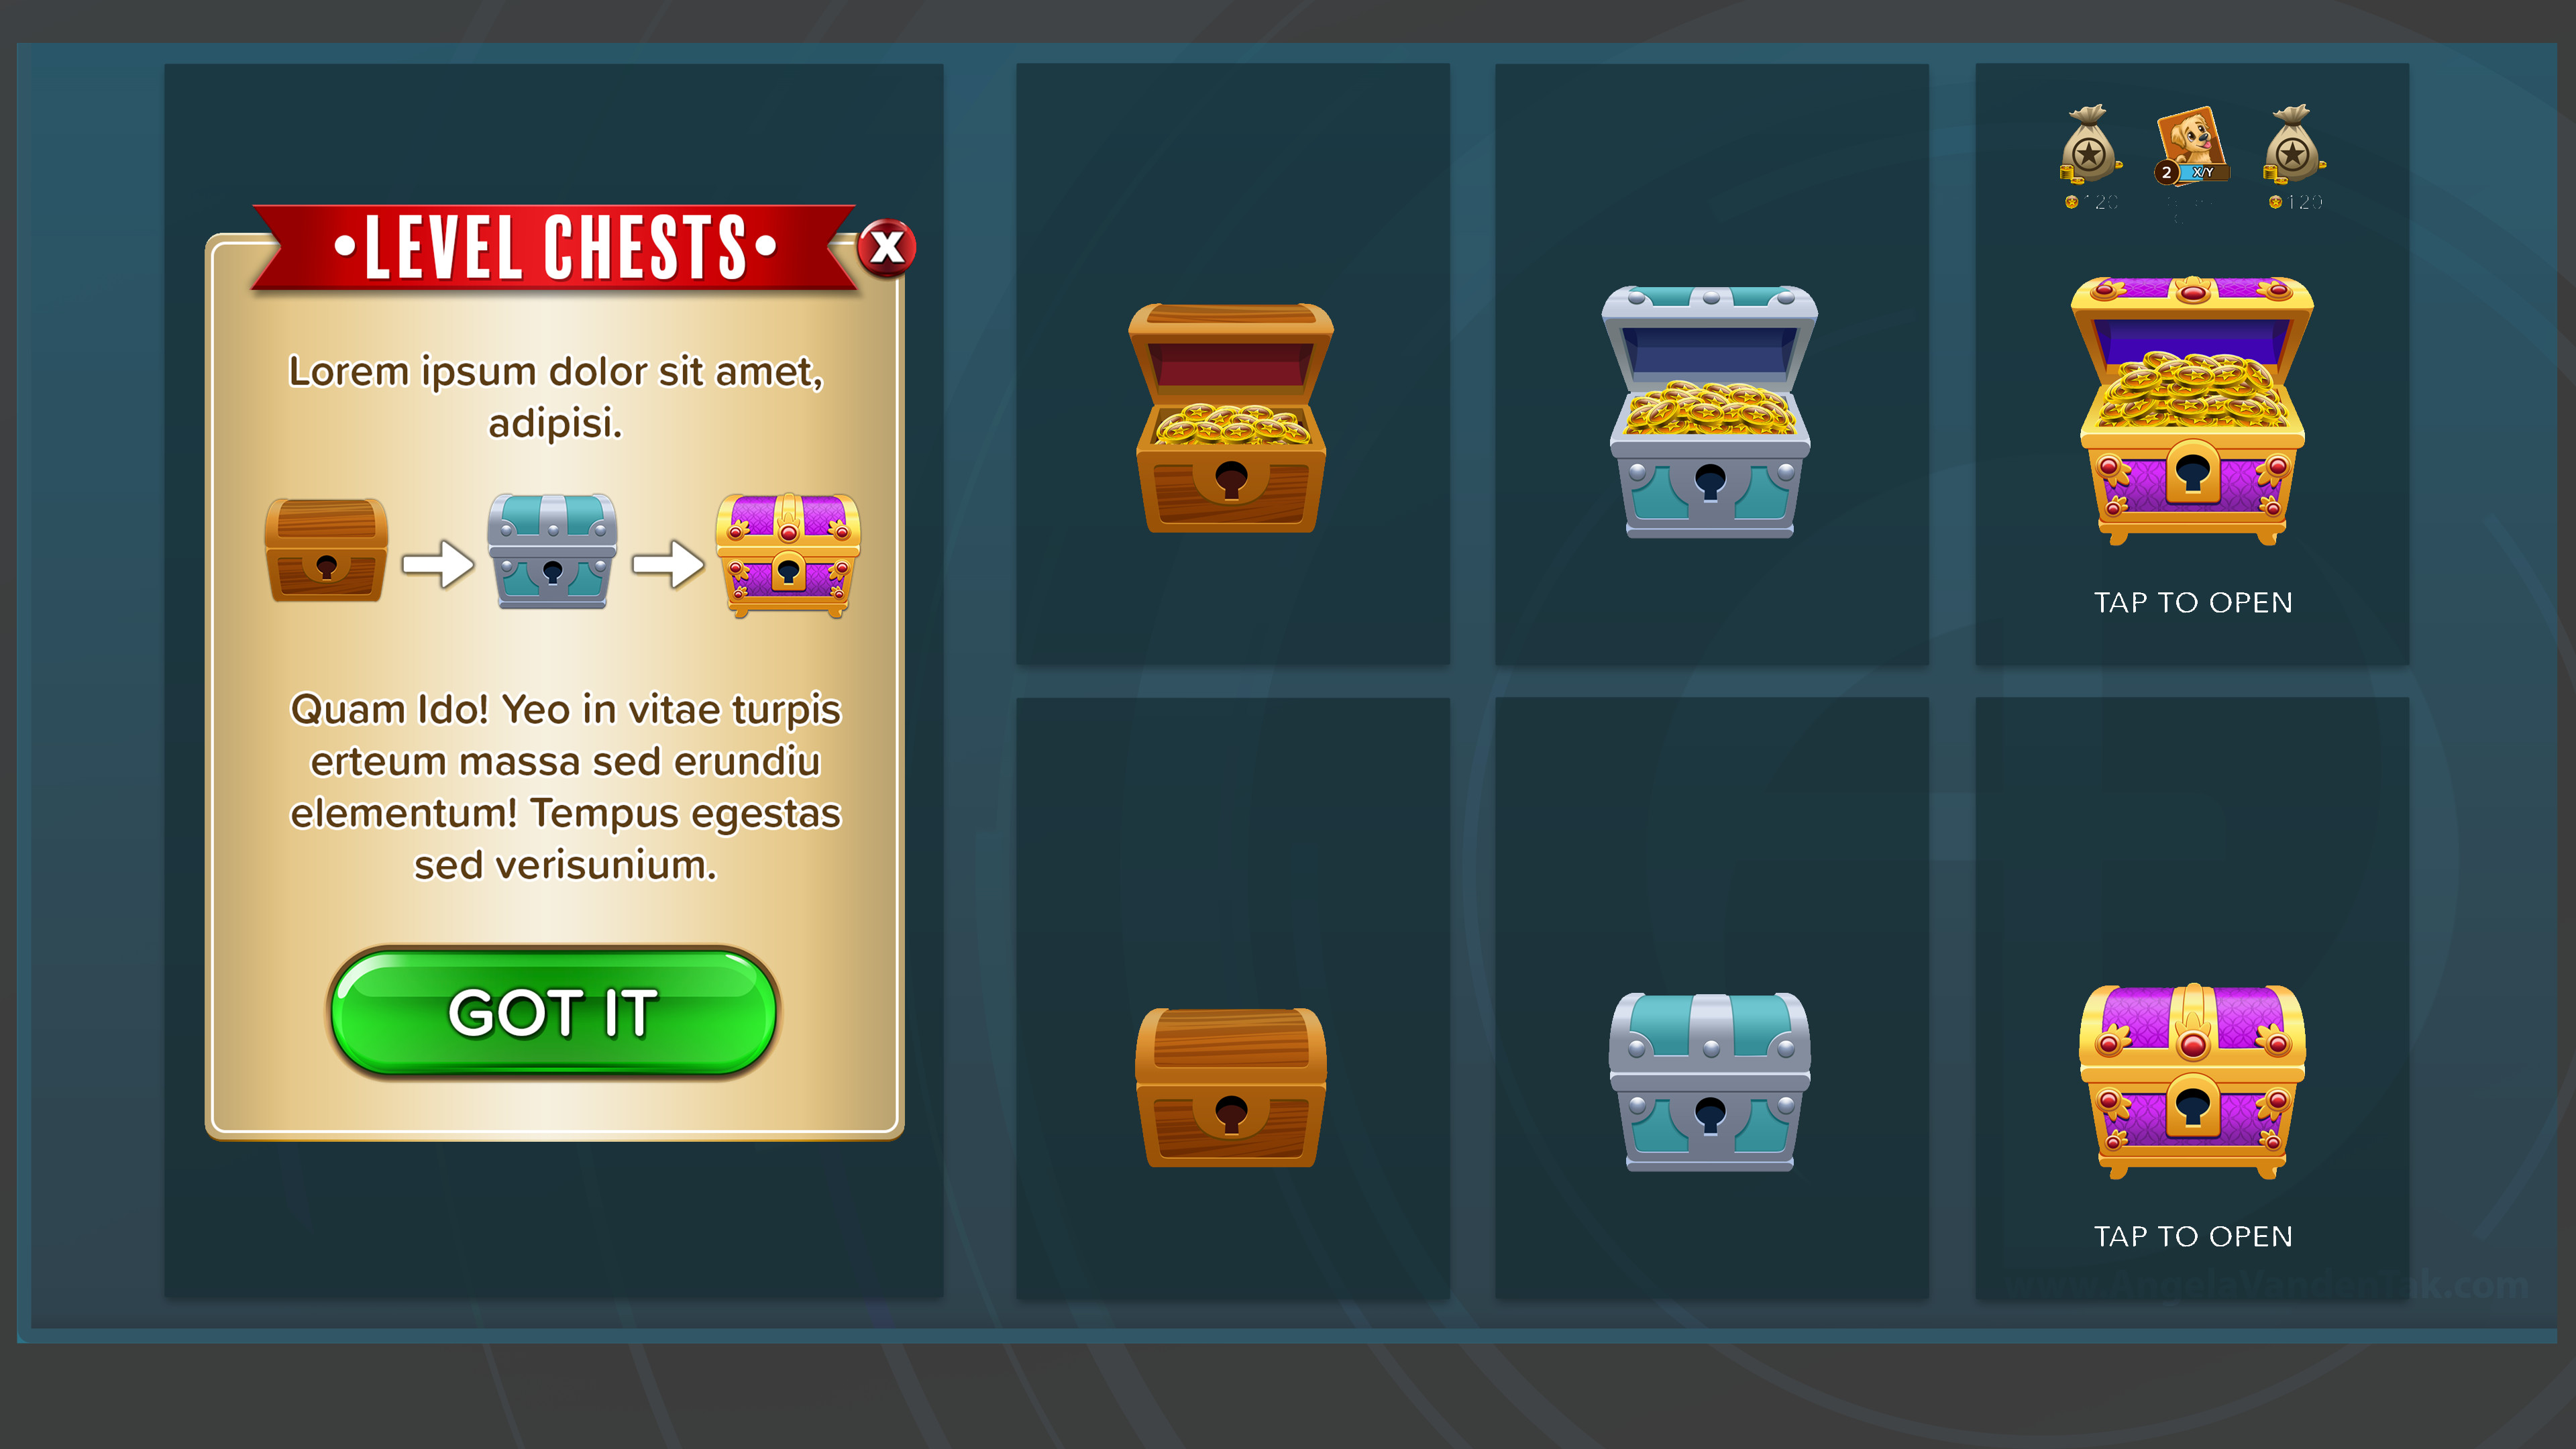 Level Chests- Hierarchy of progression rewards